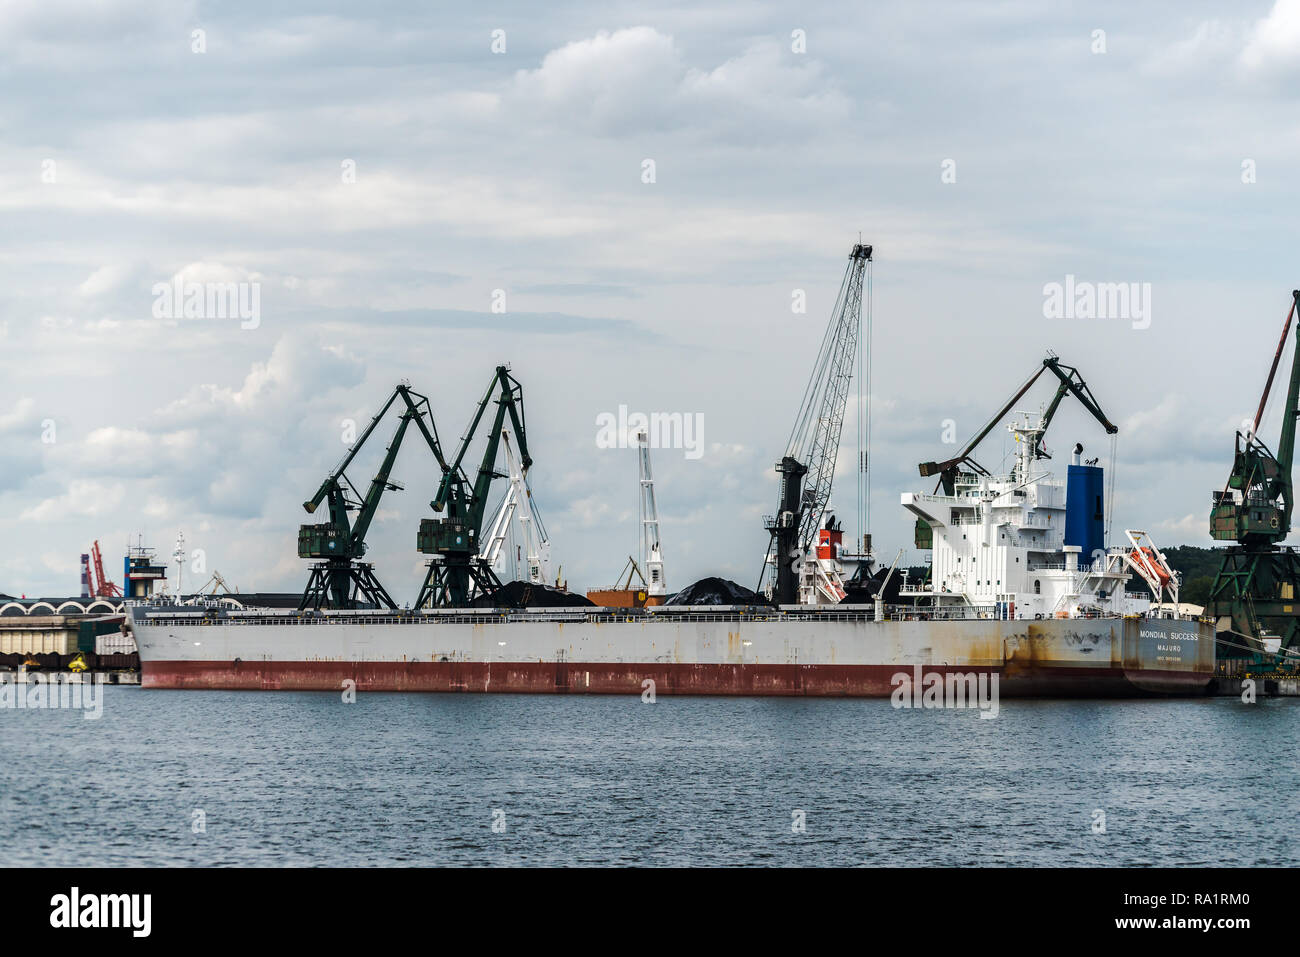 Gdynia, Poland. August 25, 2018: Views from excursion ship around  Gdynia Harbour. Cranes at wharf Stock Photo